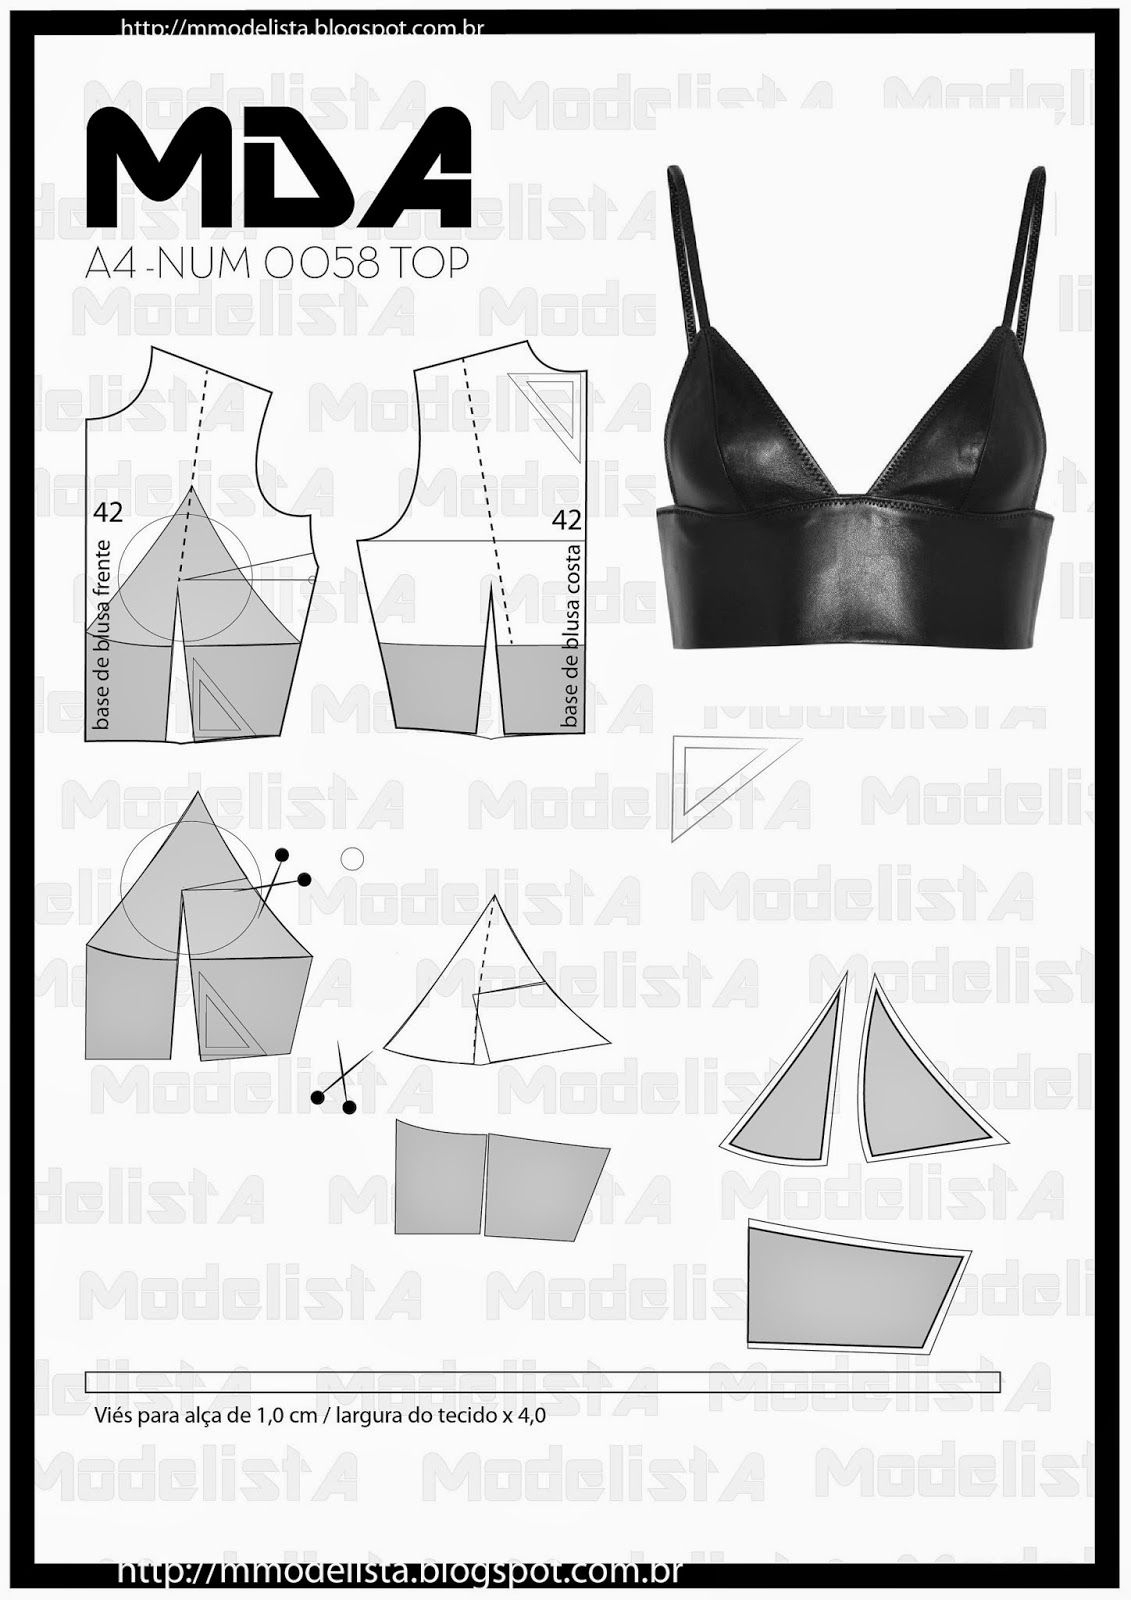 Crop Top Sewing Pattern A4 Num 0058 Top Learn Sewing Fashion Pinterest 